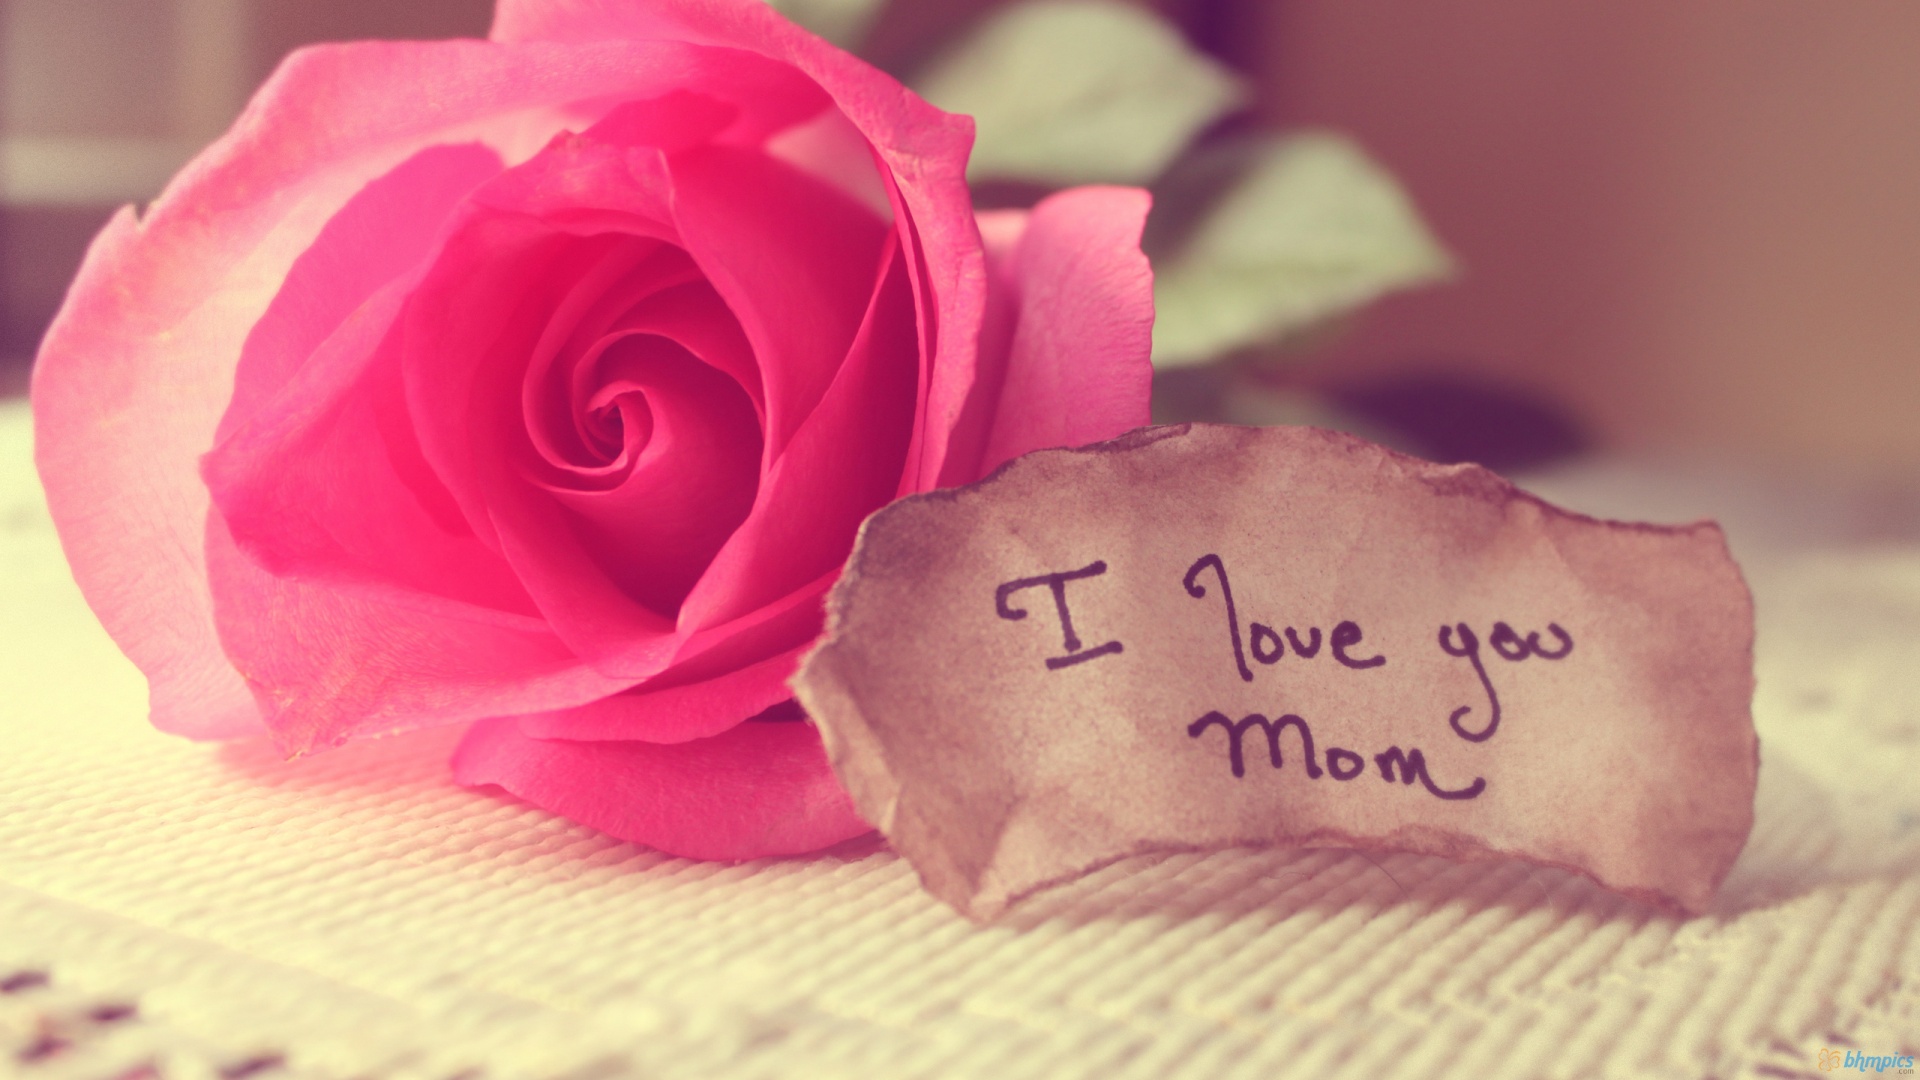 Love You Wallpaper Mothers Day I Mom HD Jpg